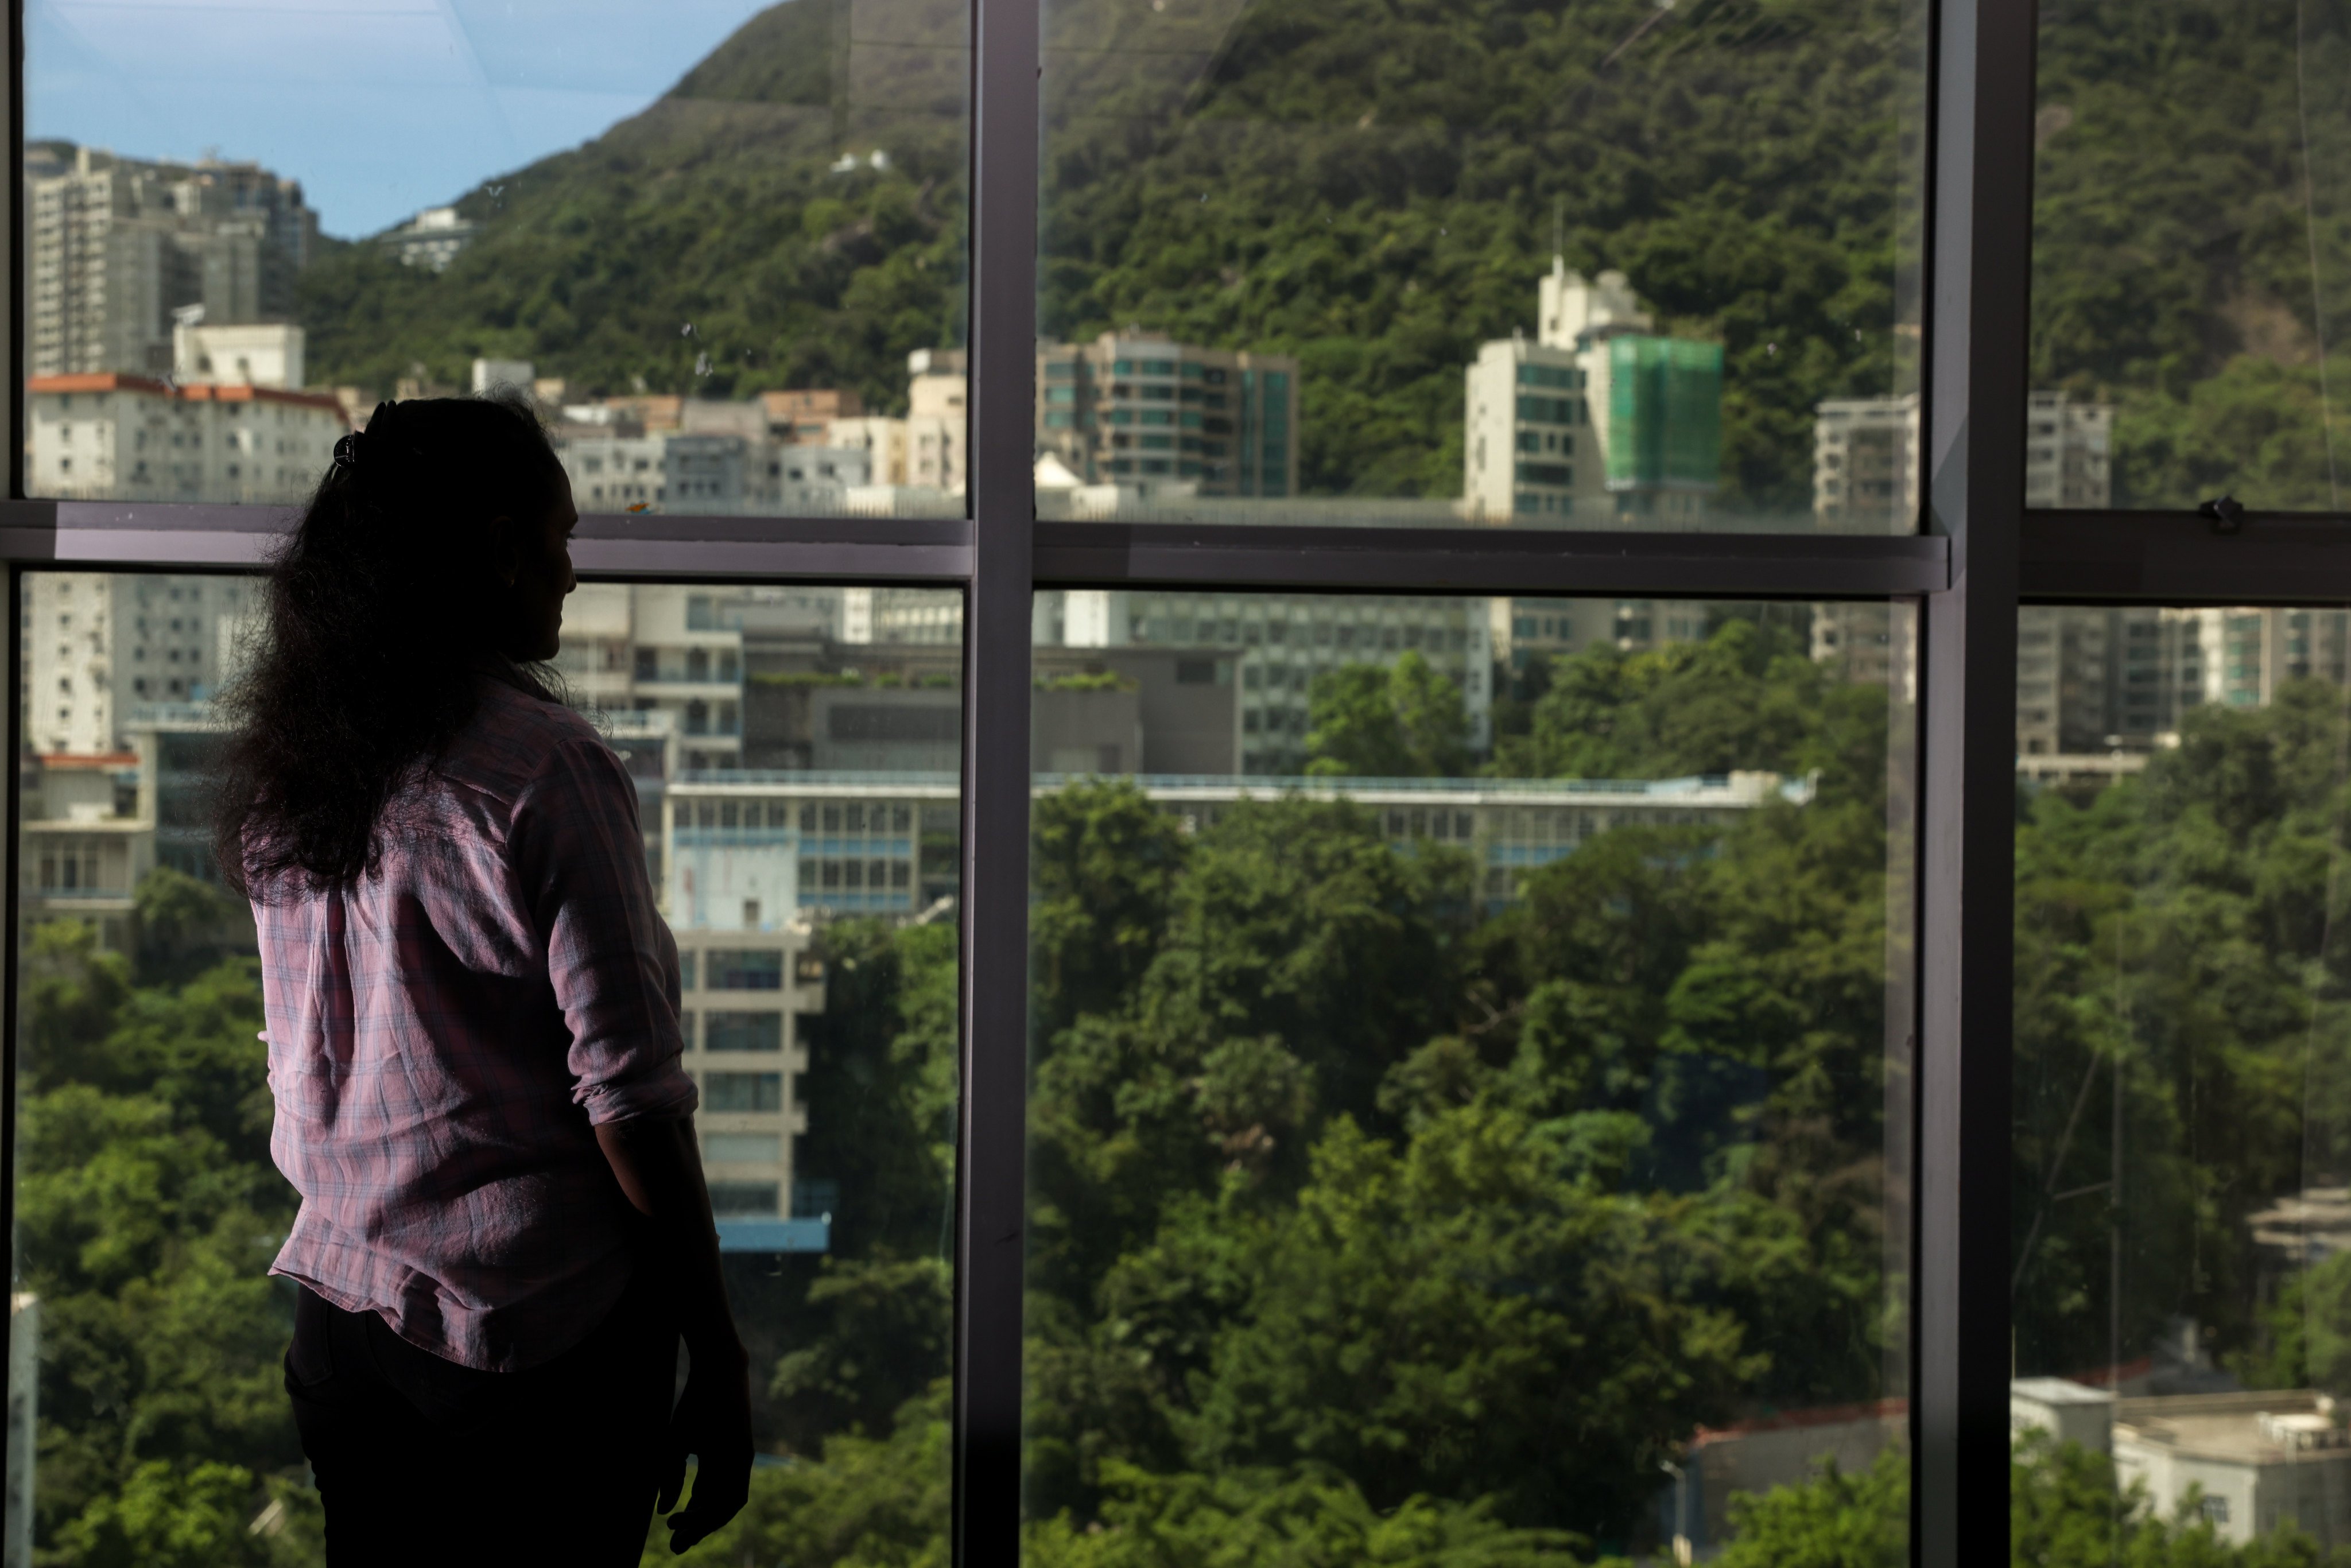 Gita, a Sri Lankan national, looks out over Hong Kong. She claims to have been the victim of abuse at the hands of her former employer in the city. Photo: Yik Yeung-man